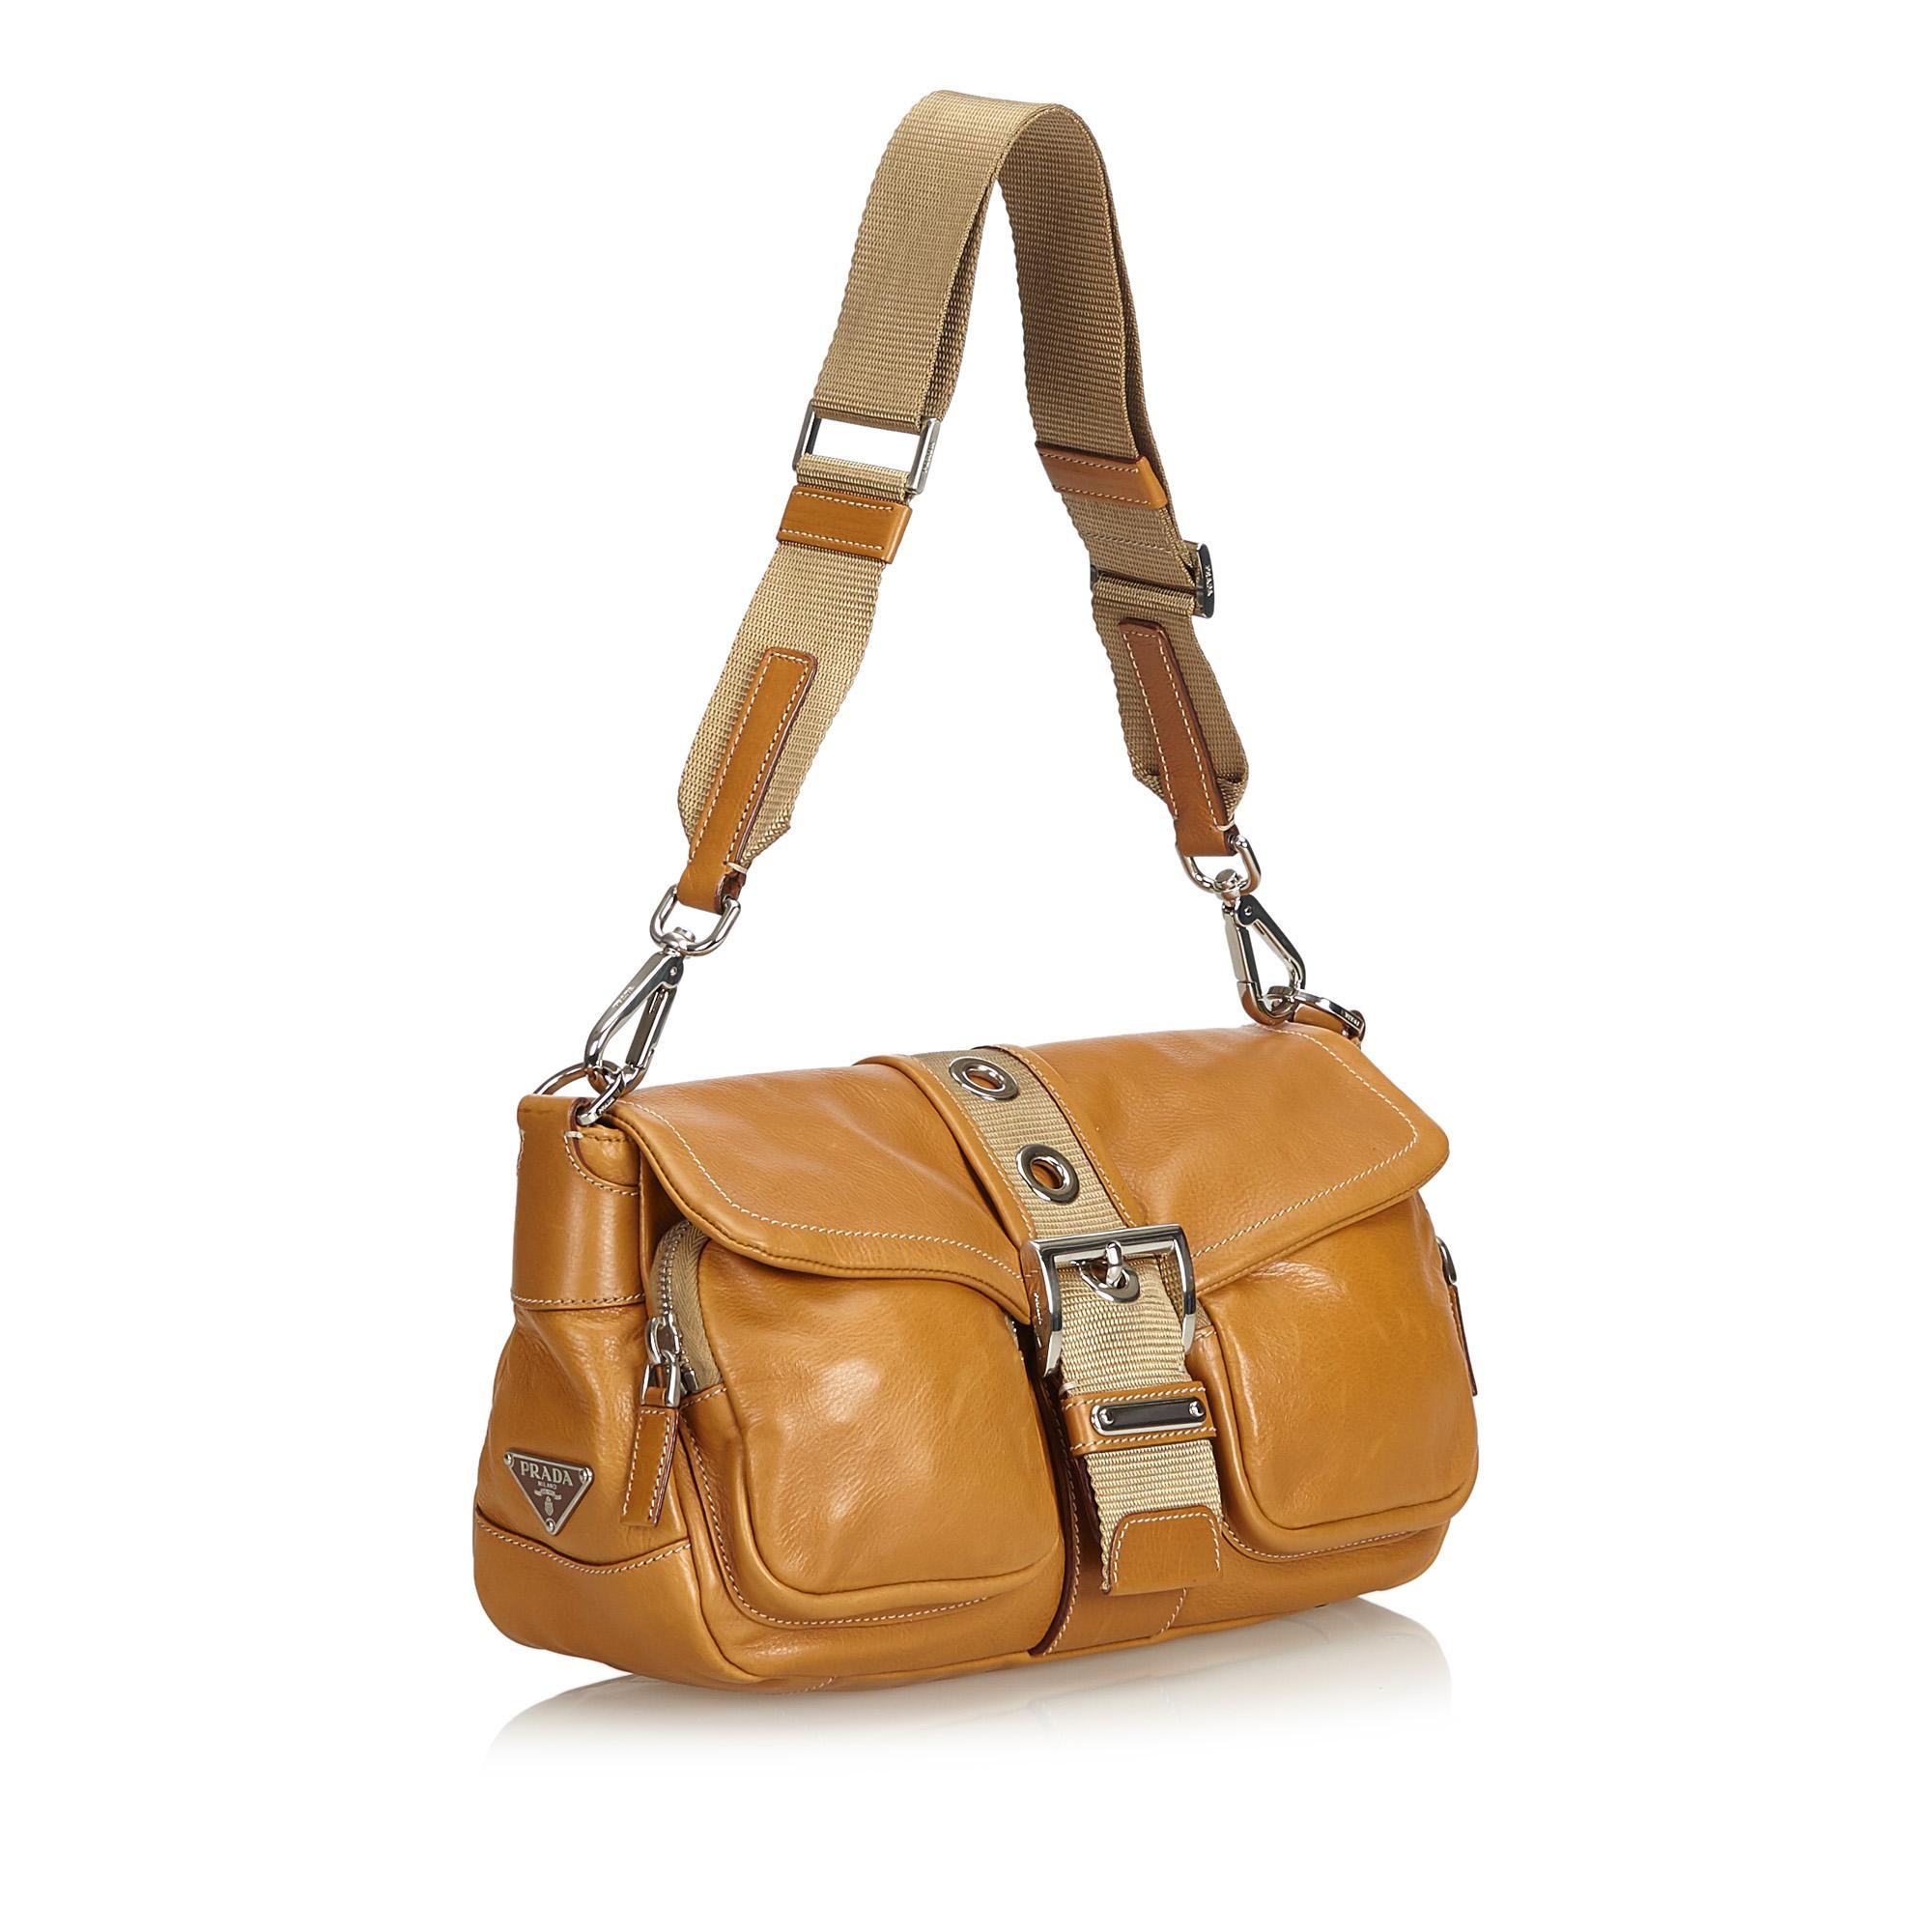 This shoulder bag features a leather body, a flat strap, a top flap with a belt detail, a top zip closure, and an interior zip pocket. It carries as B condition rating.

Inclusions: 
Dust Bag
Authenticity Card

Dimensions:
Length: 19.00 cm
Width: